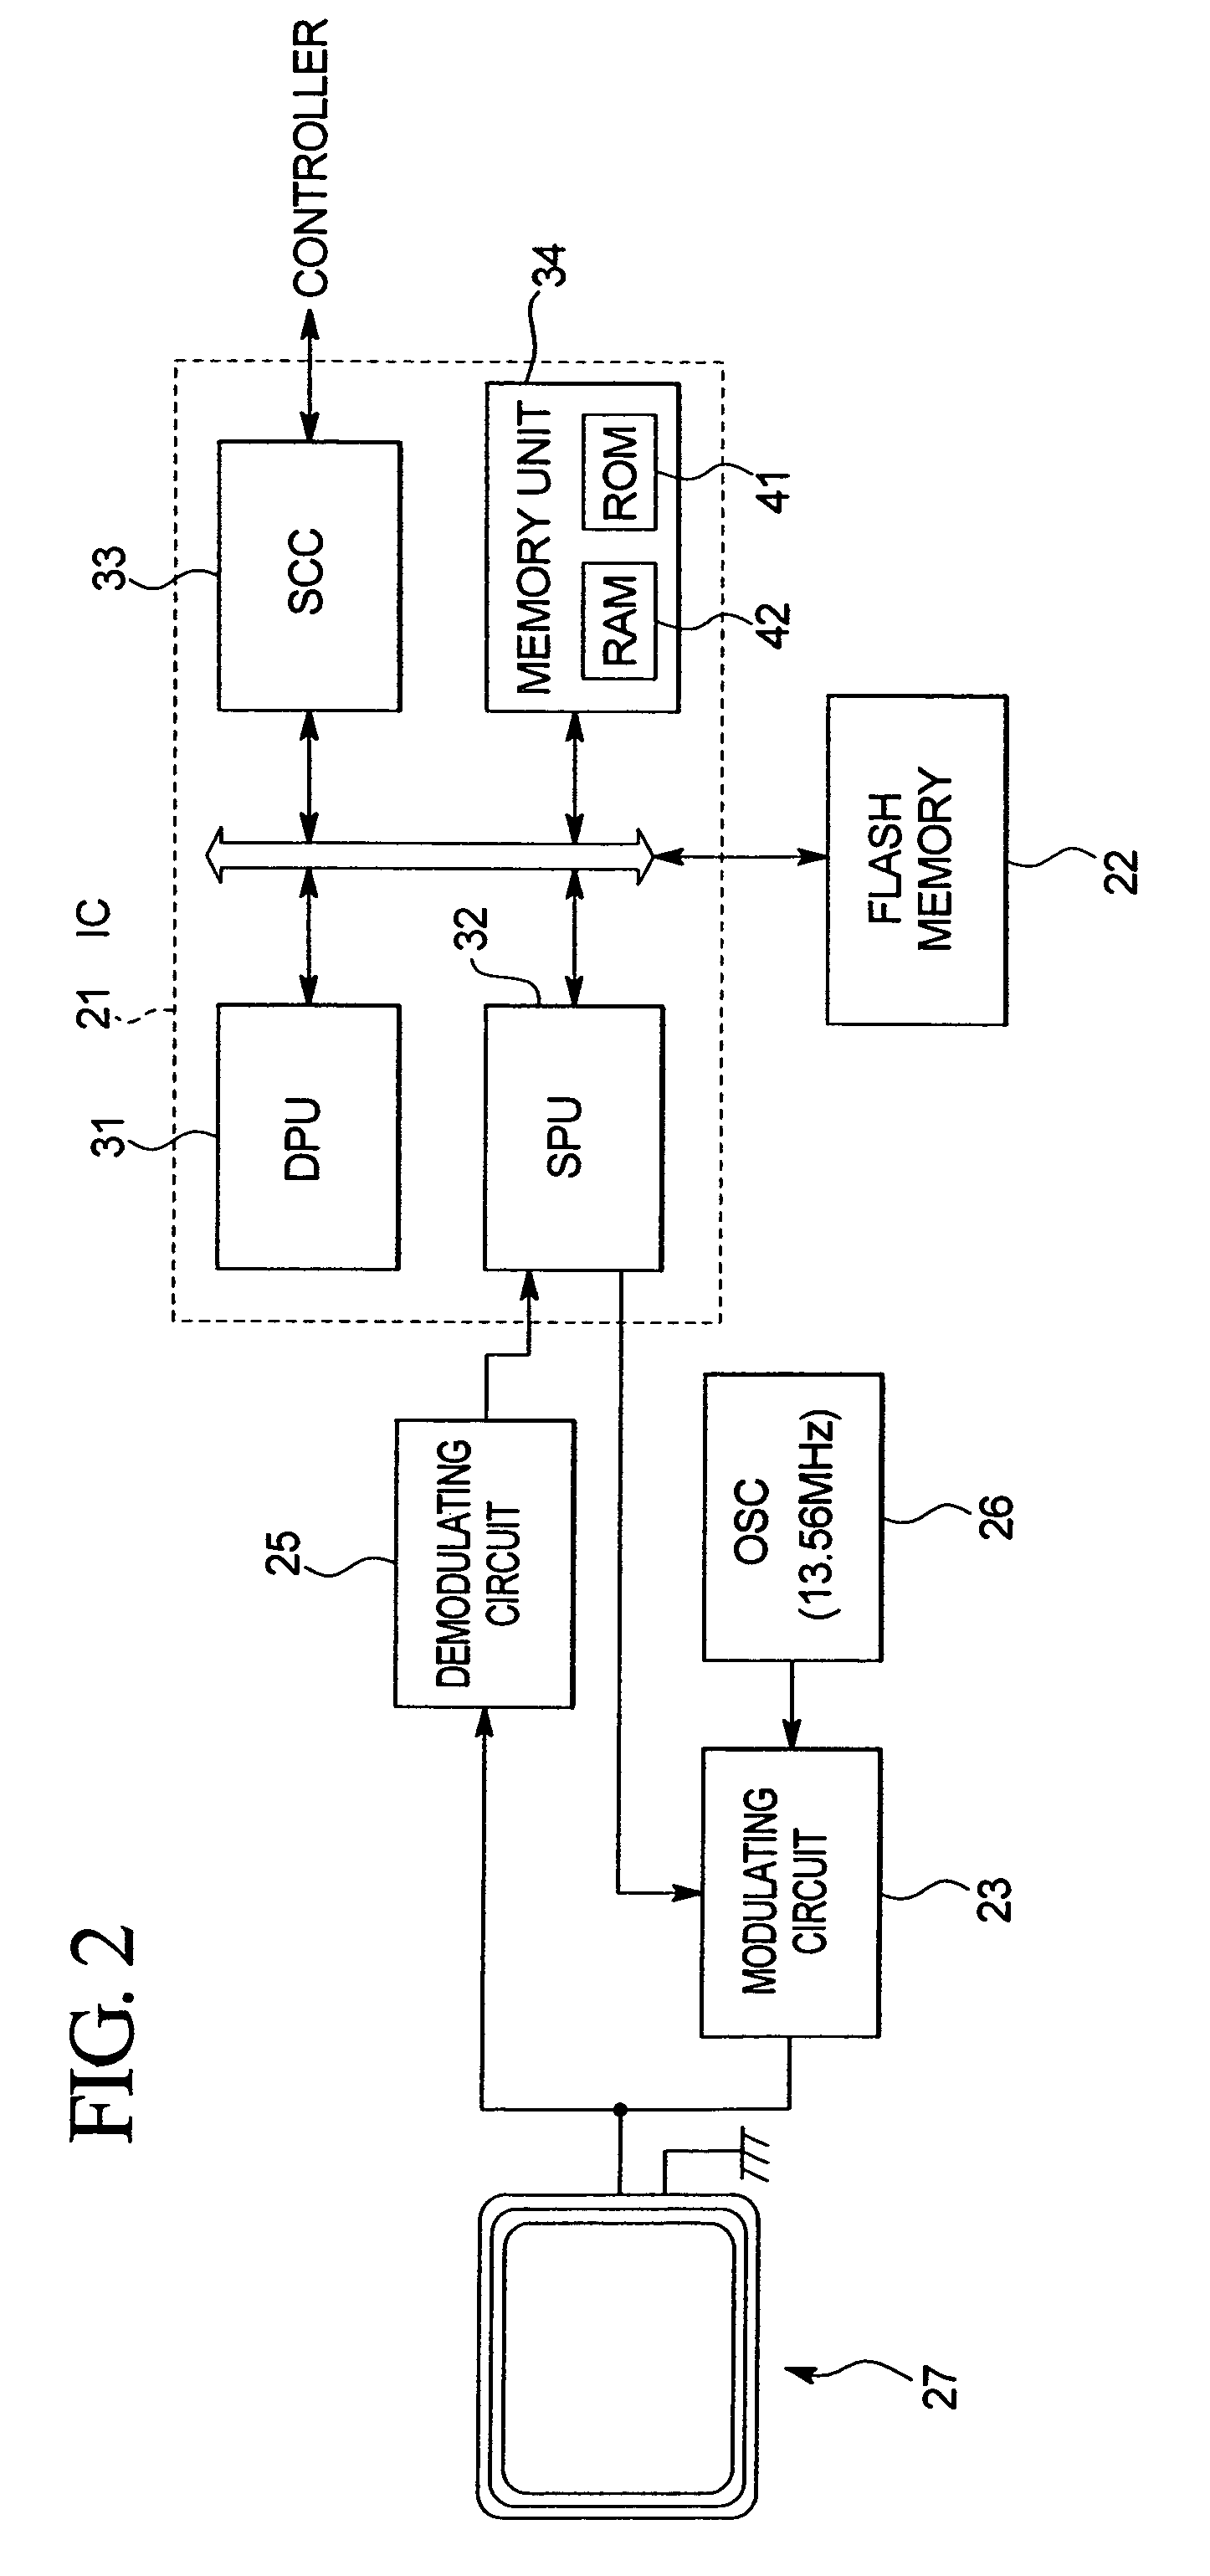 Information processing method and apparatus having data locations accessible by different devices in accordance with different permissions